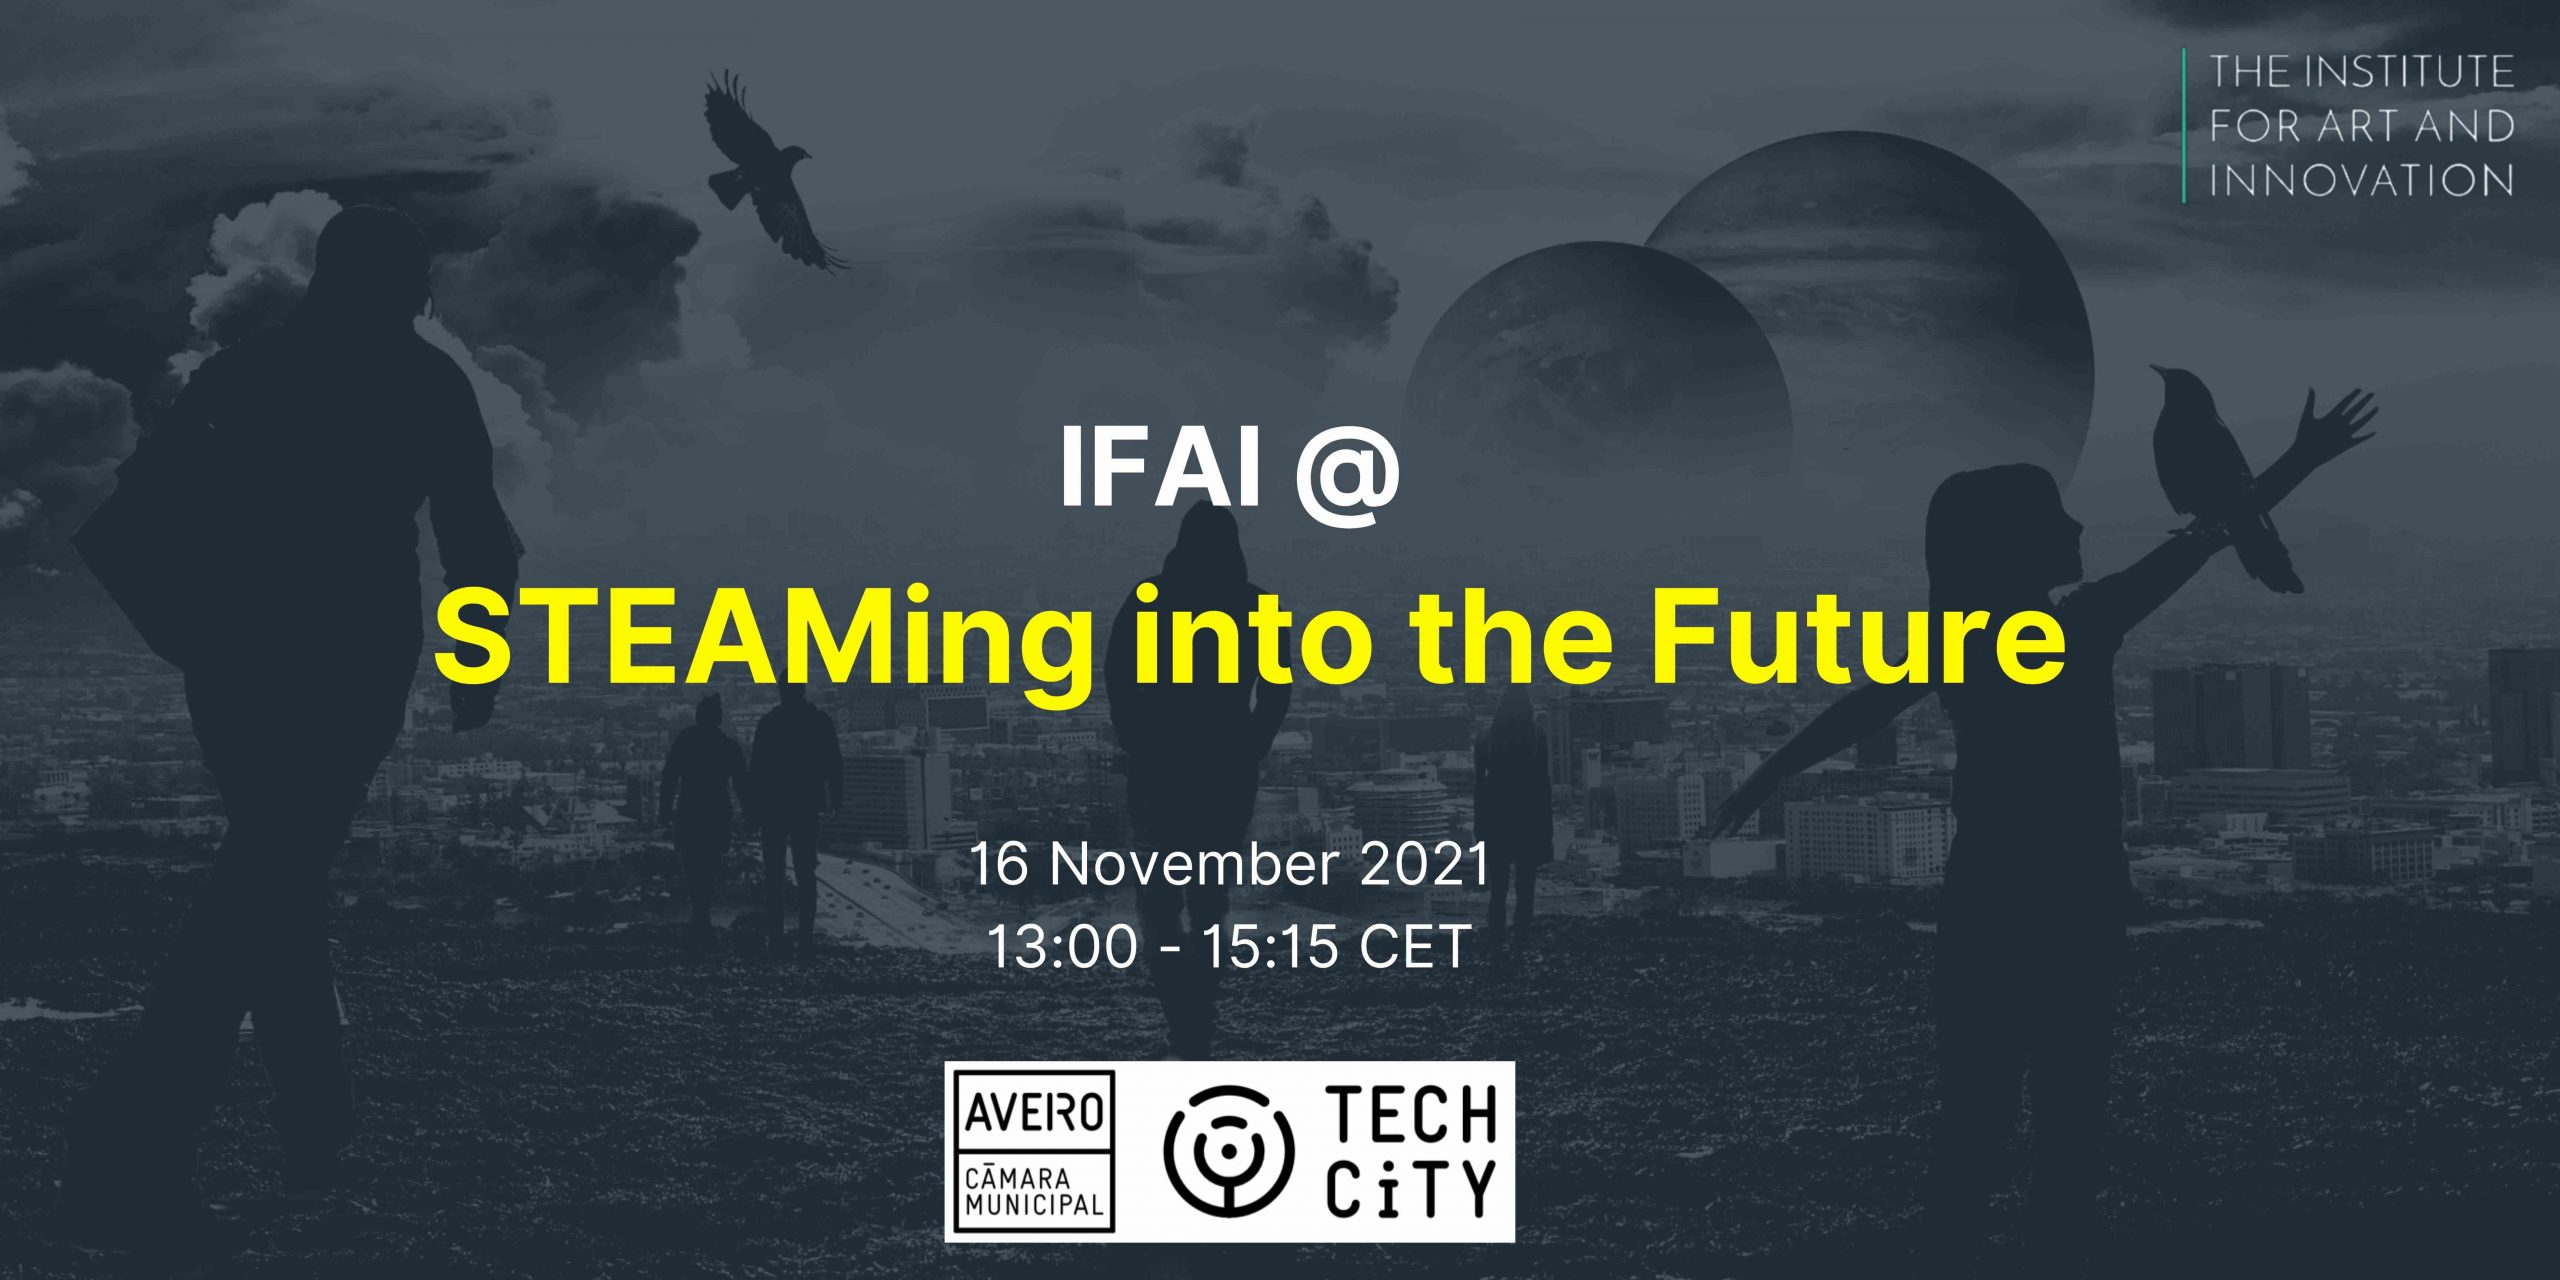 IFAI @STEAMing into the Future